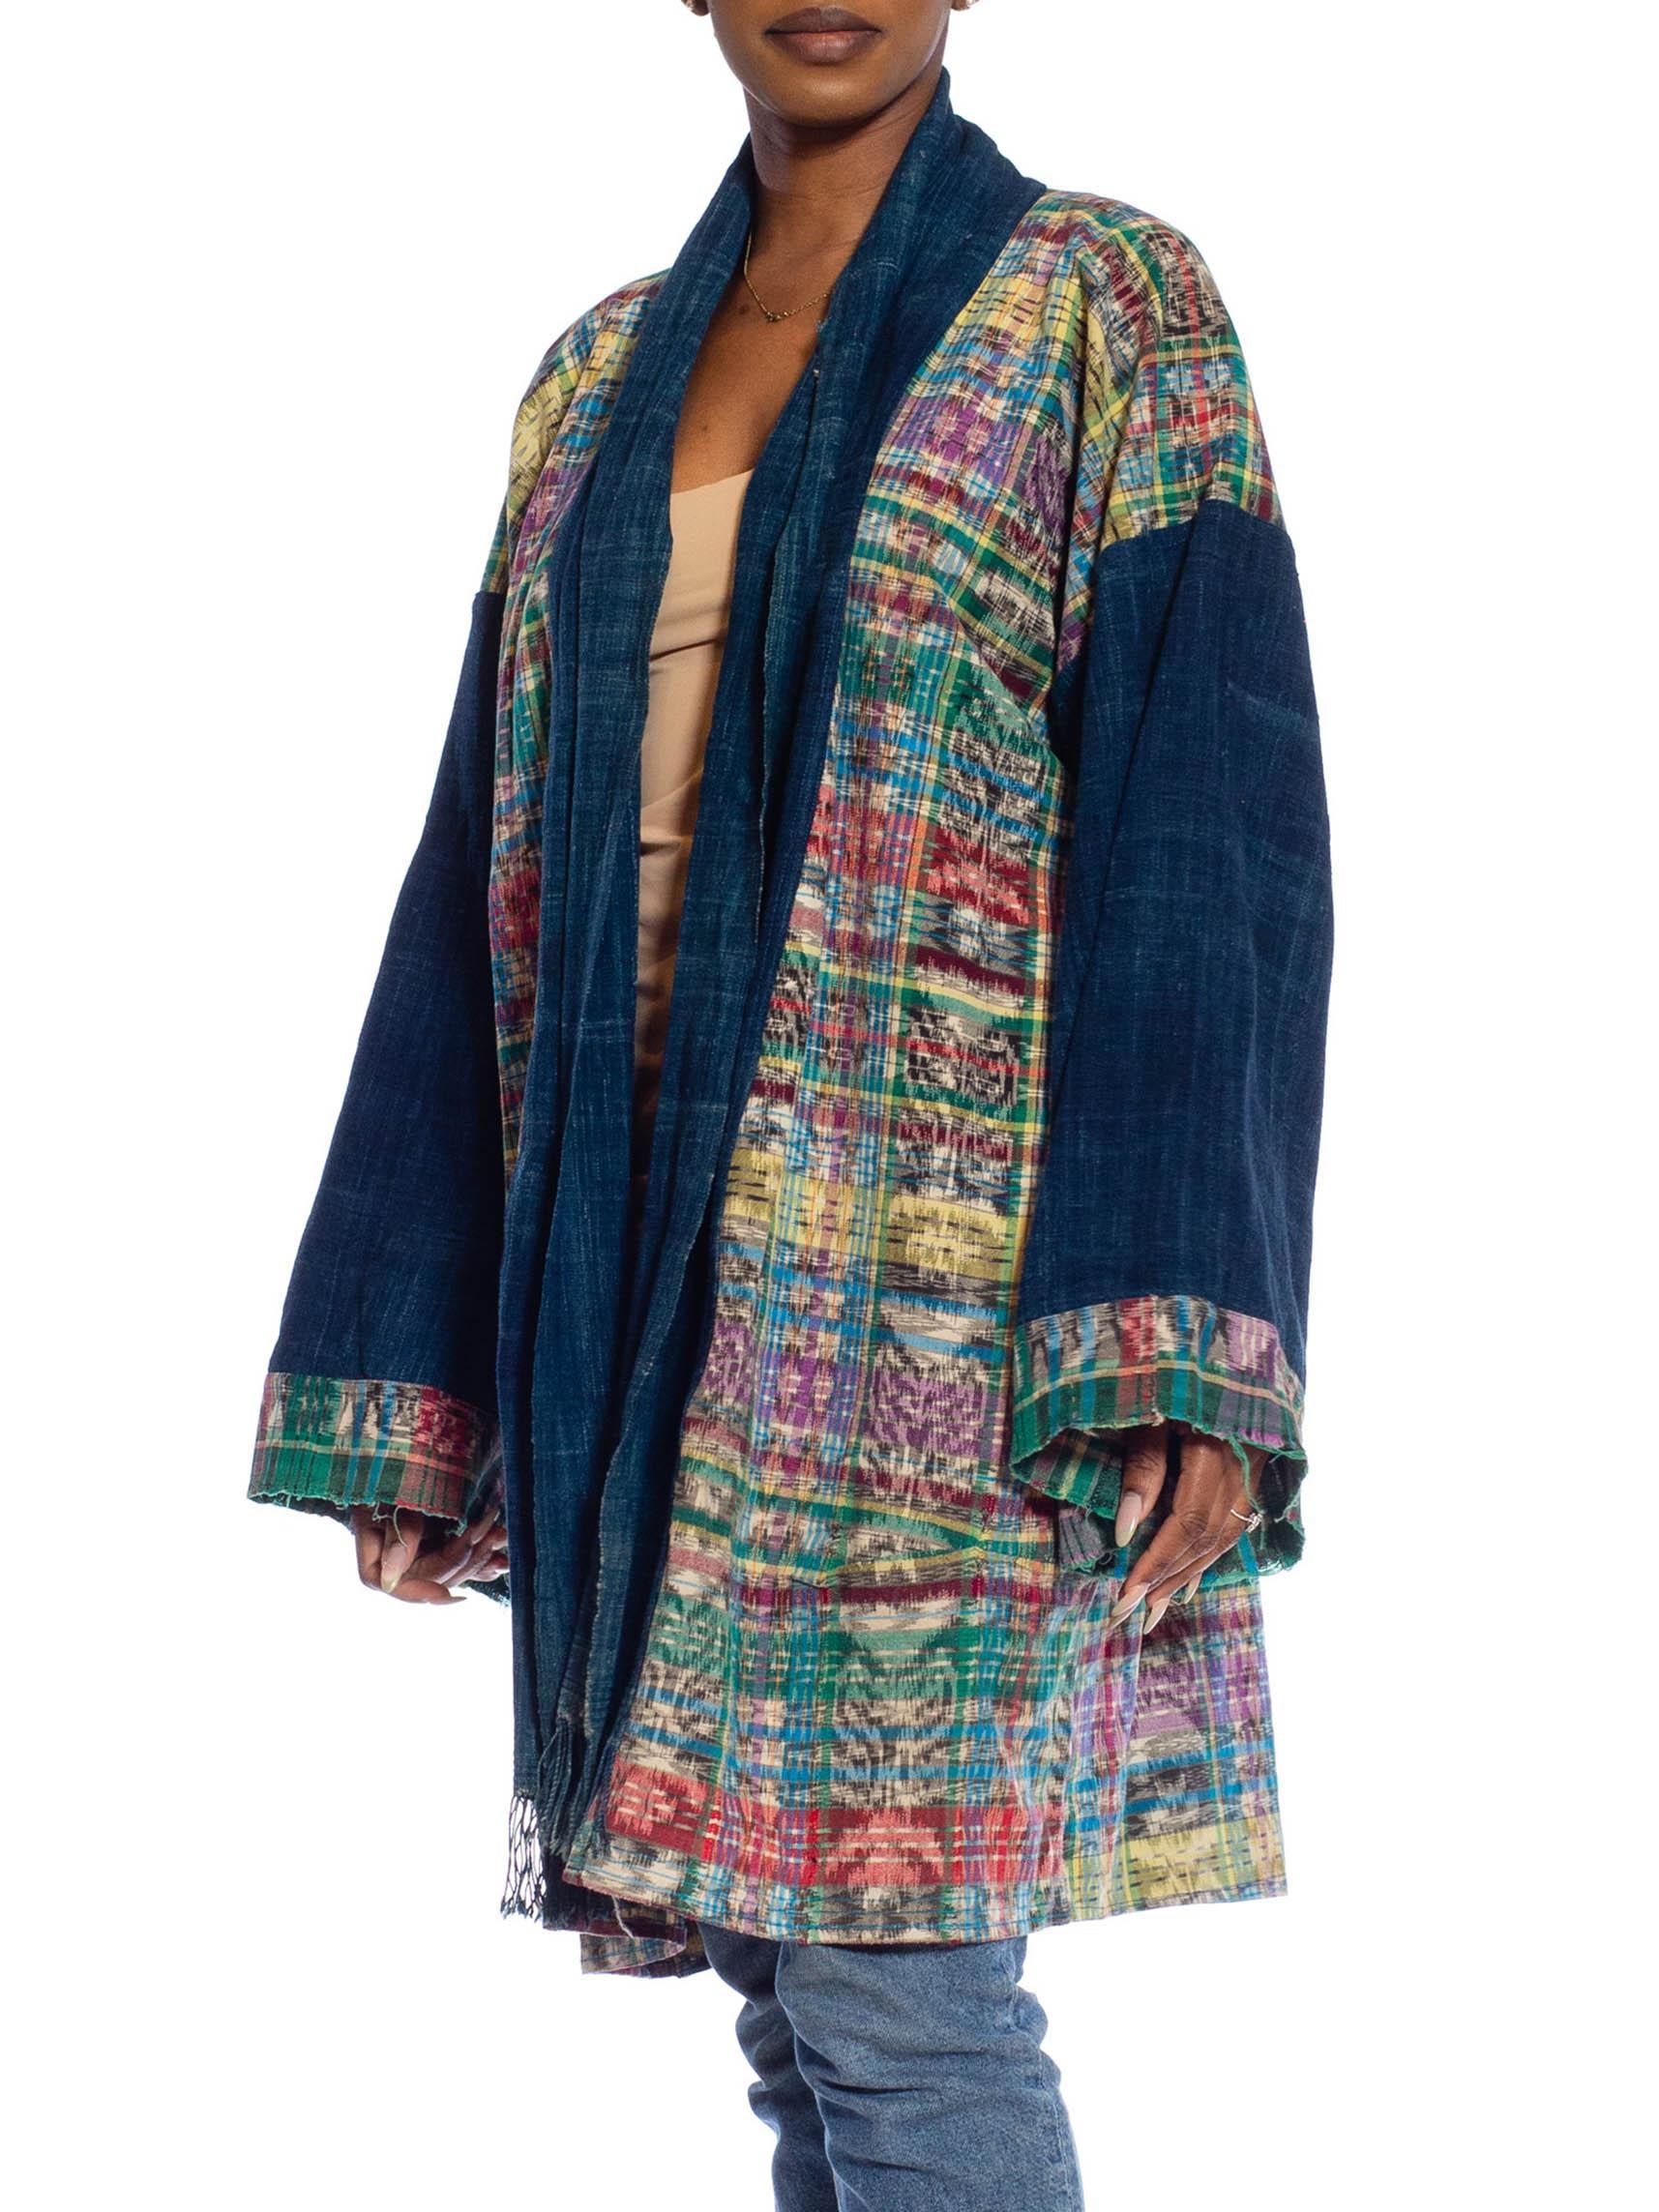 MORPHEW COLLECTION Navy Blue Multi African Cotton & Hand-Woven Guatemalan Ikat  For Sale 5